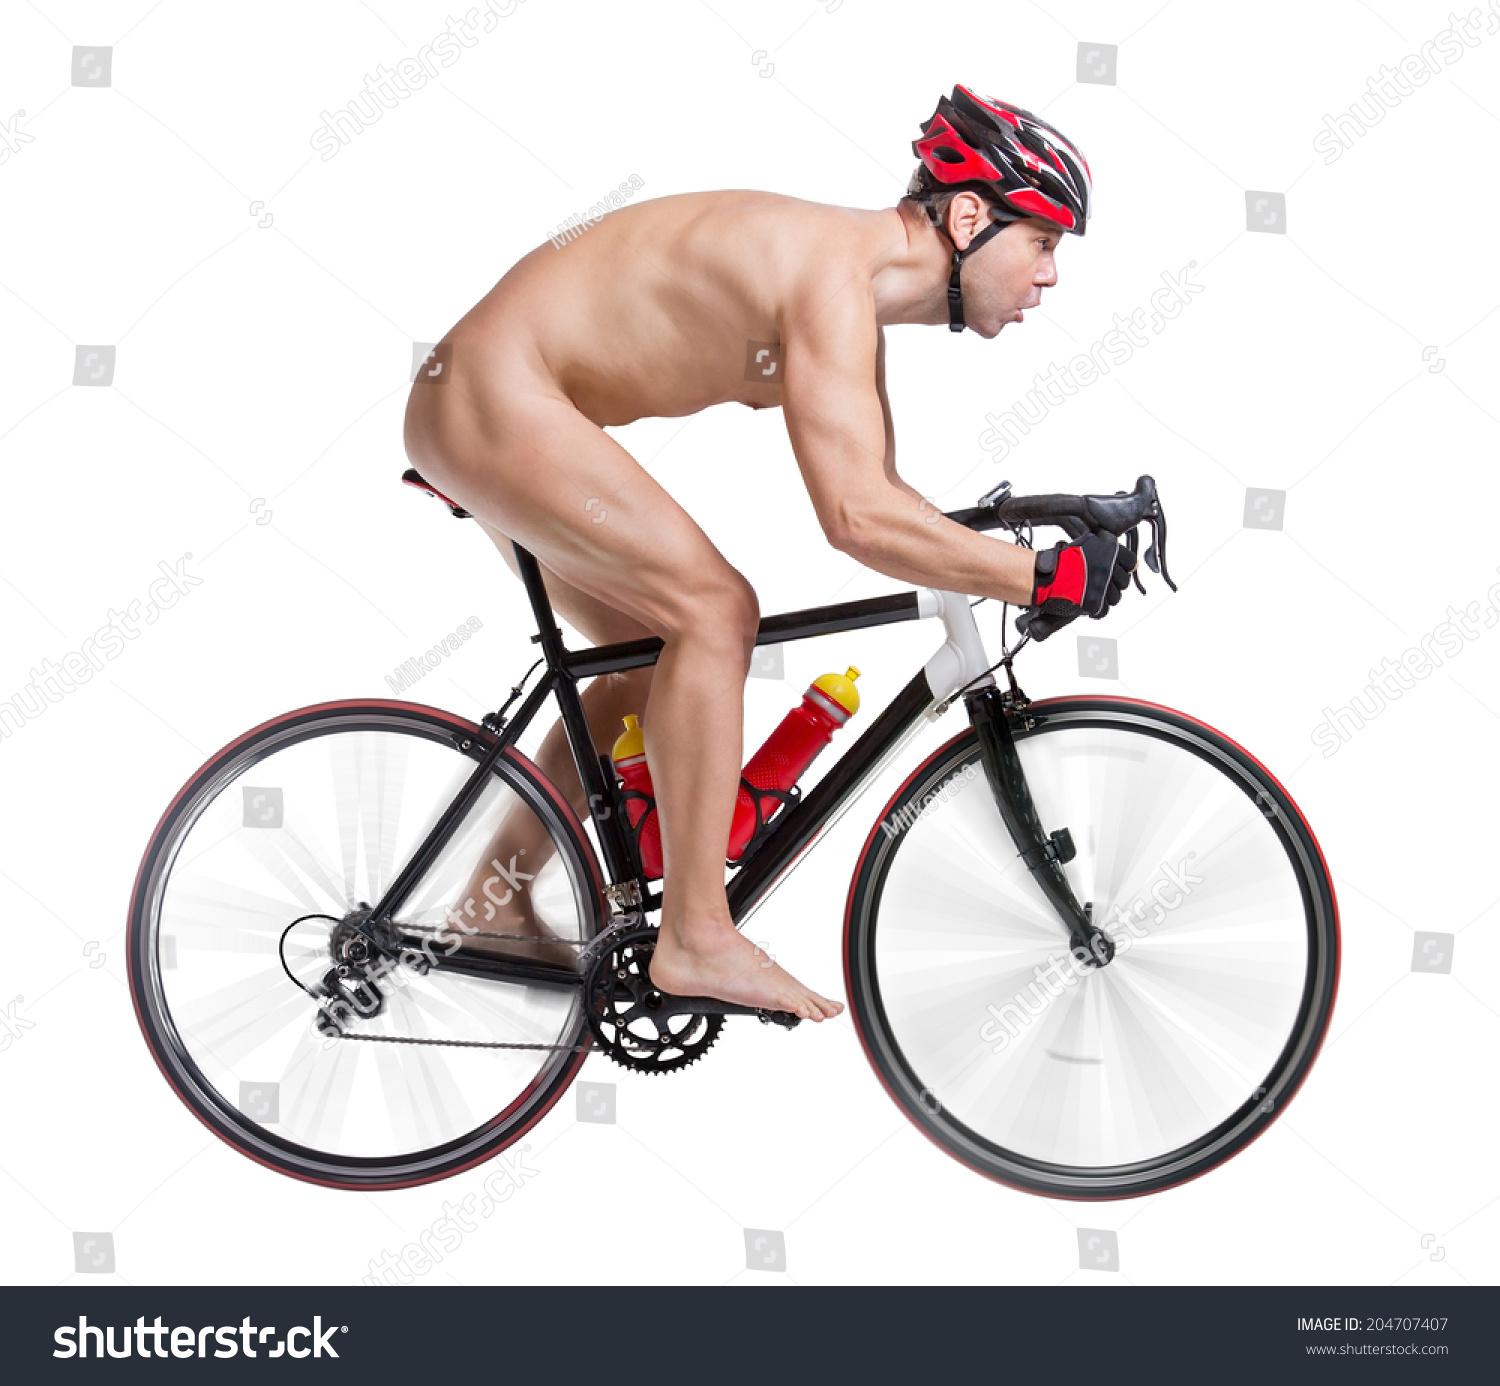 Riding the bicycle with no clothes on